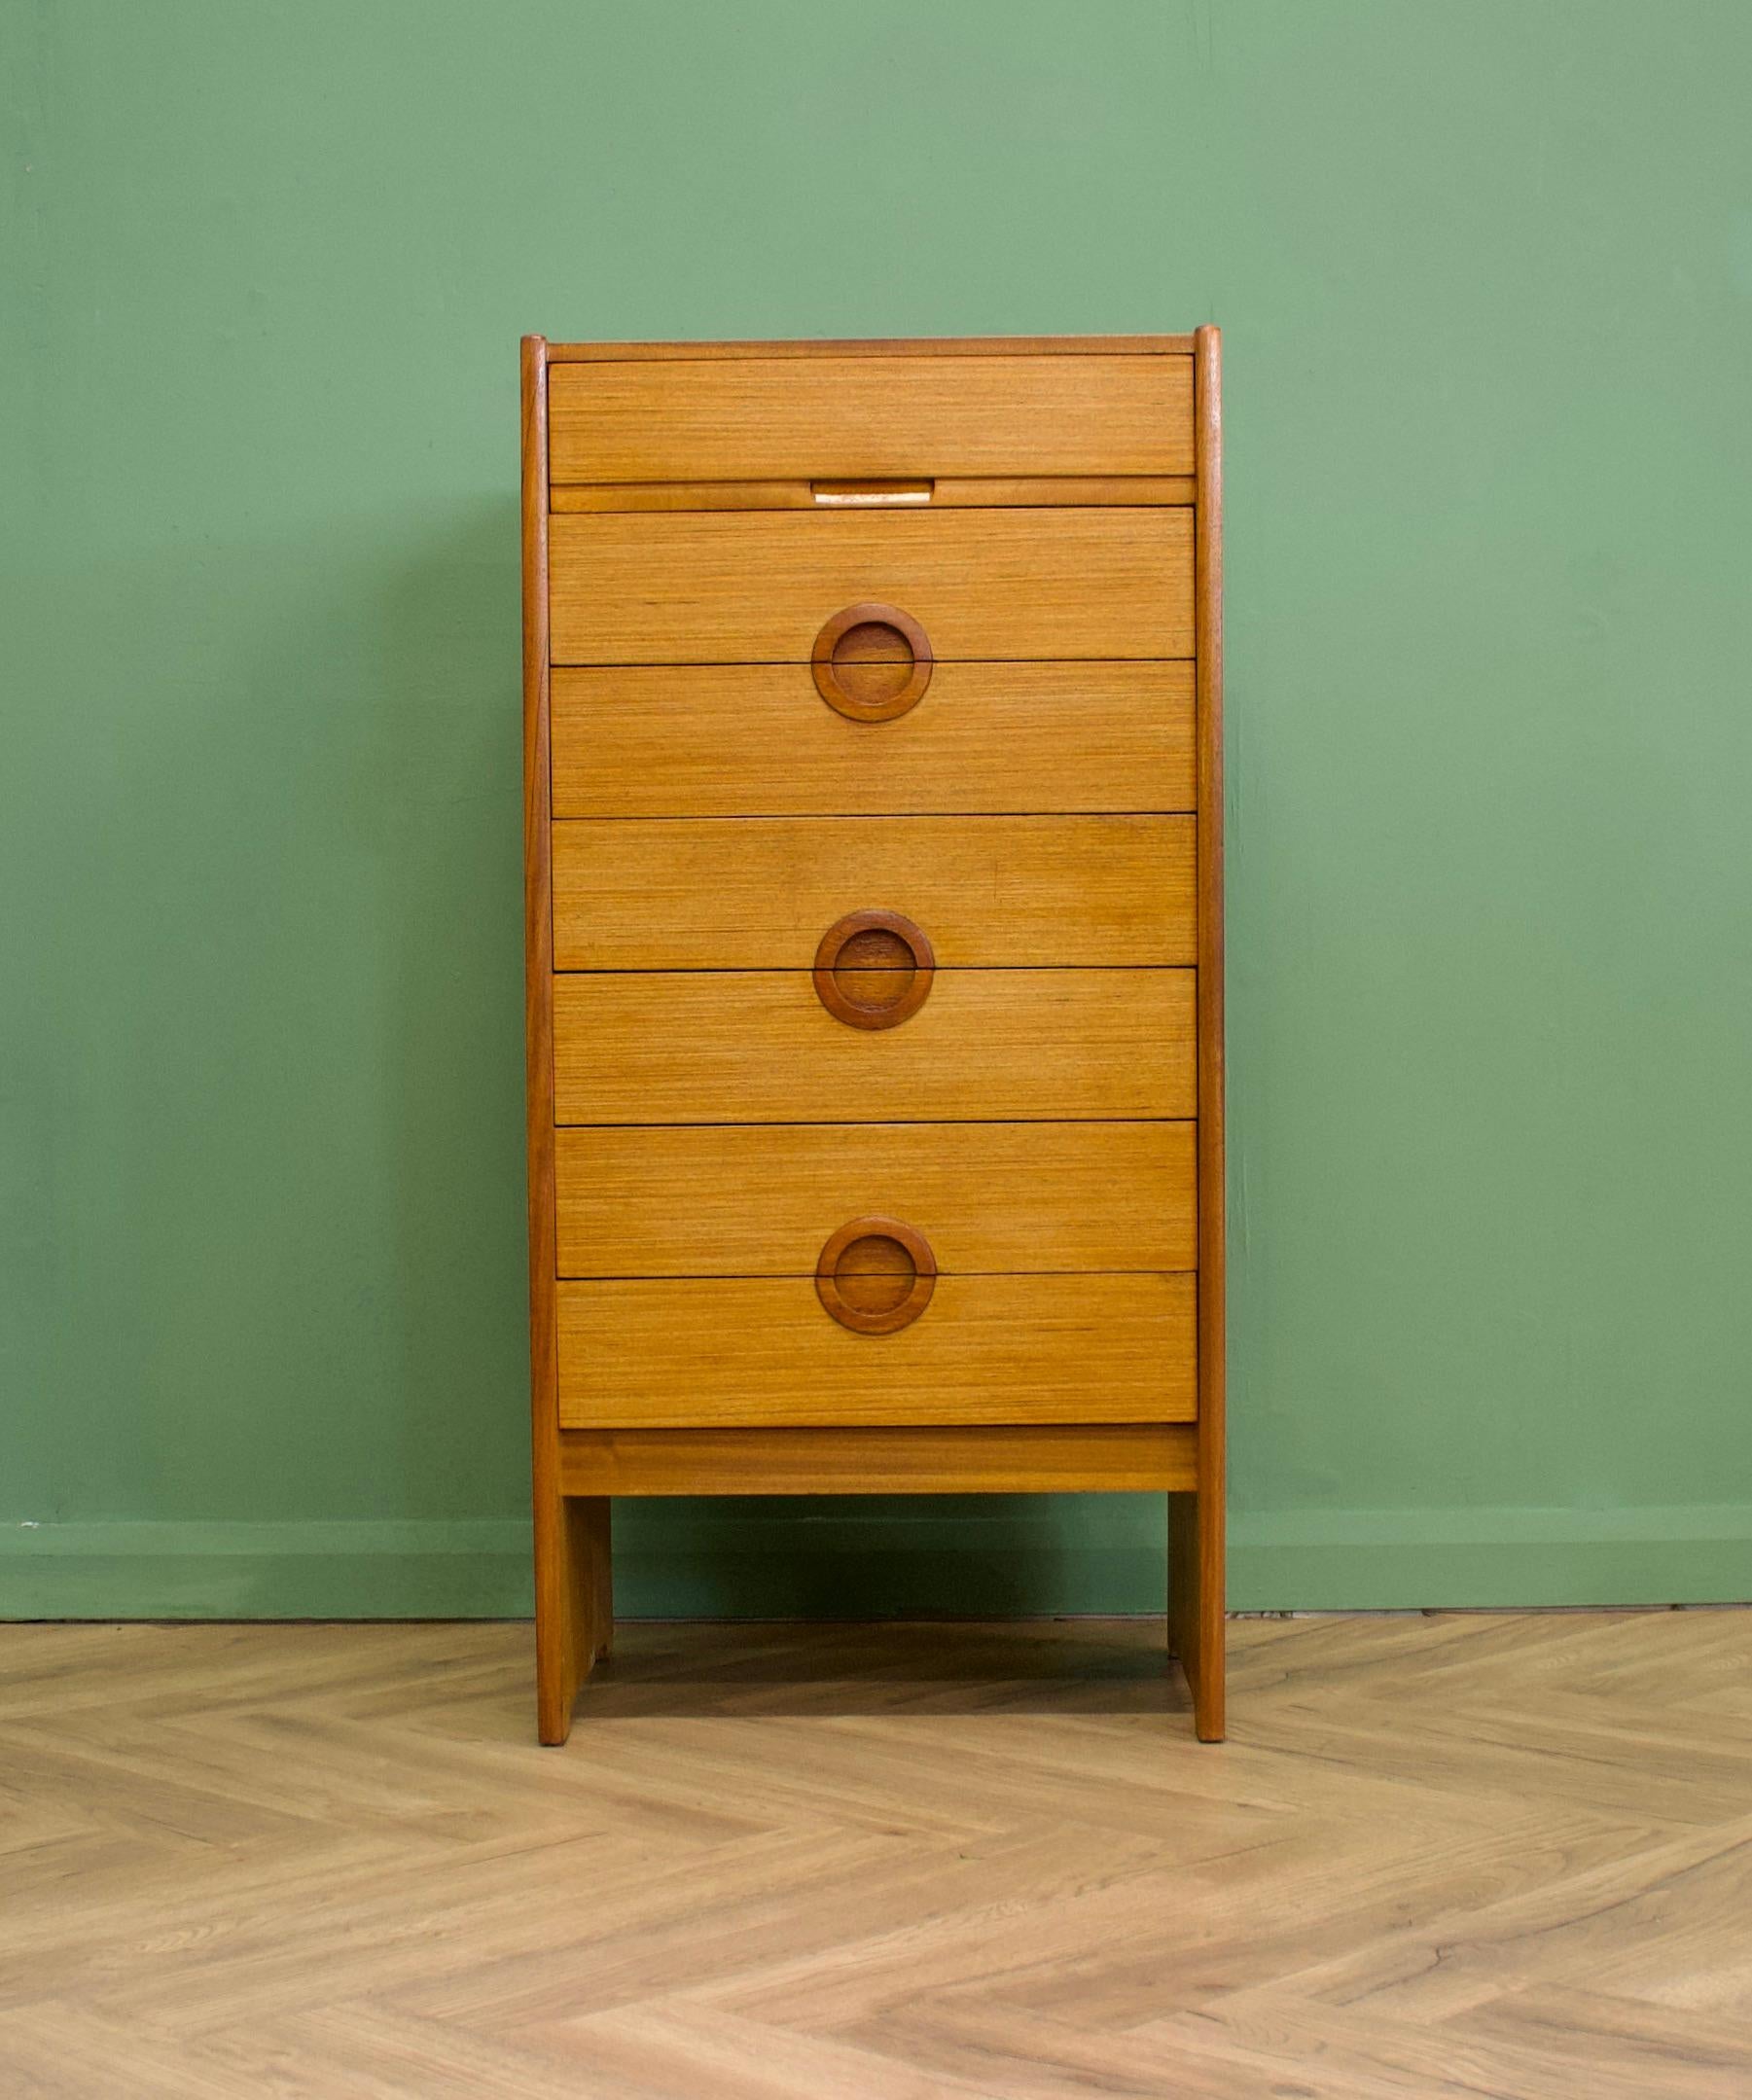 - midcentury chest of drawers
- Manufactured in the UK 
- Made from teak and teak veneer.
- Featuring 7 drawers.